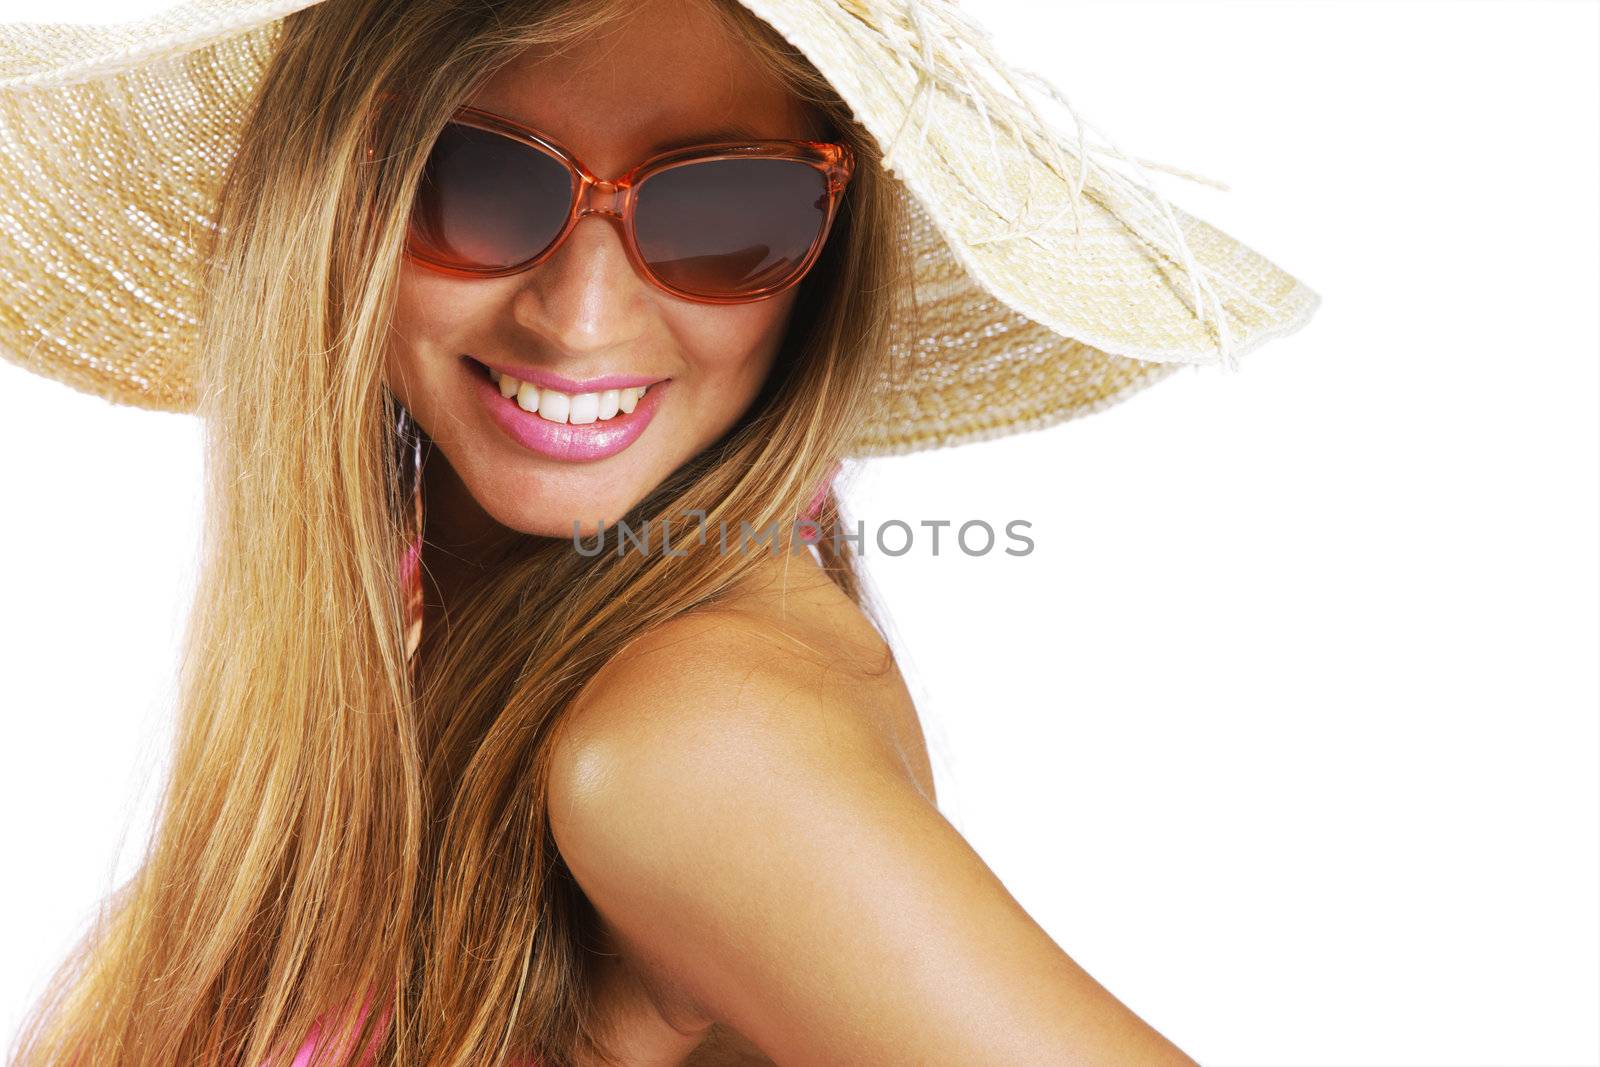 Summer time: Young woman portrait on white background, copy space